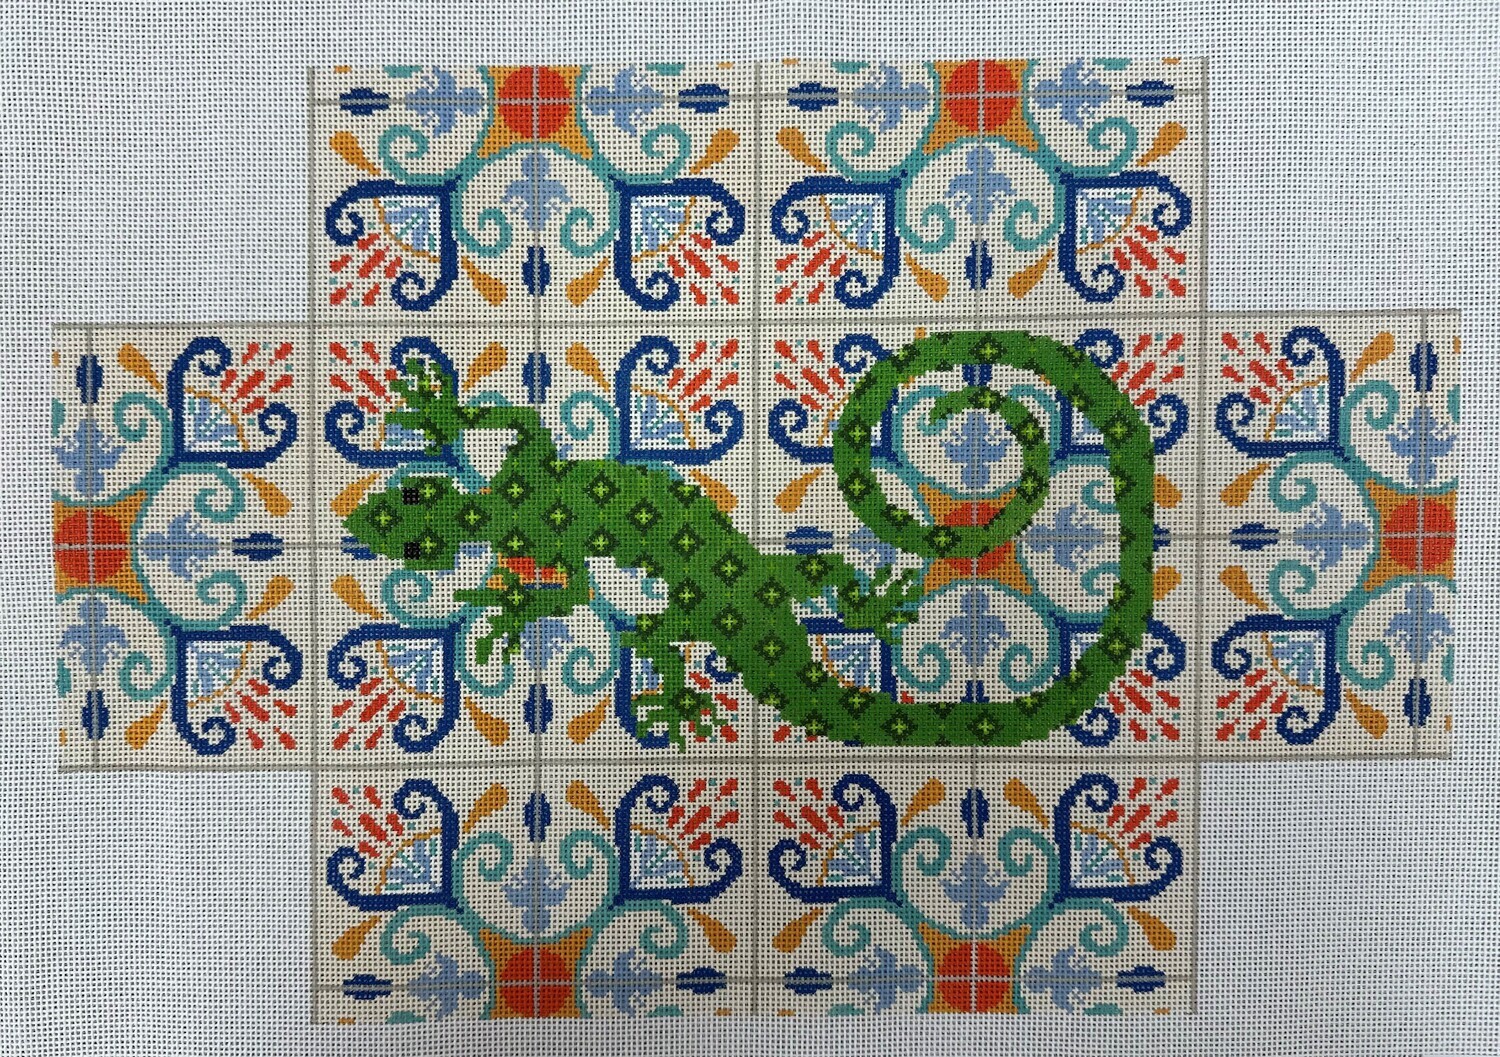 Lizard on Tile Brick Cover (Handpainted by Janice Holden)